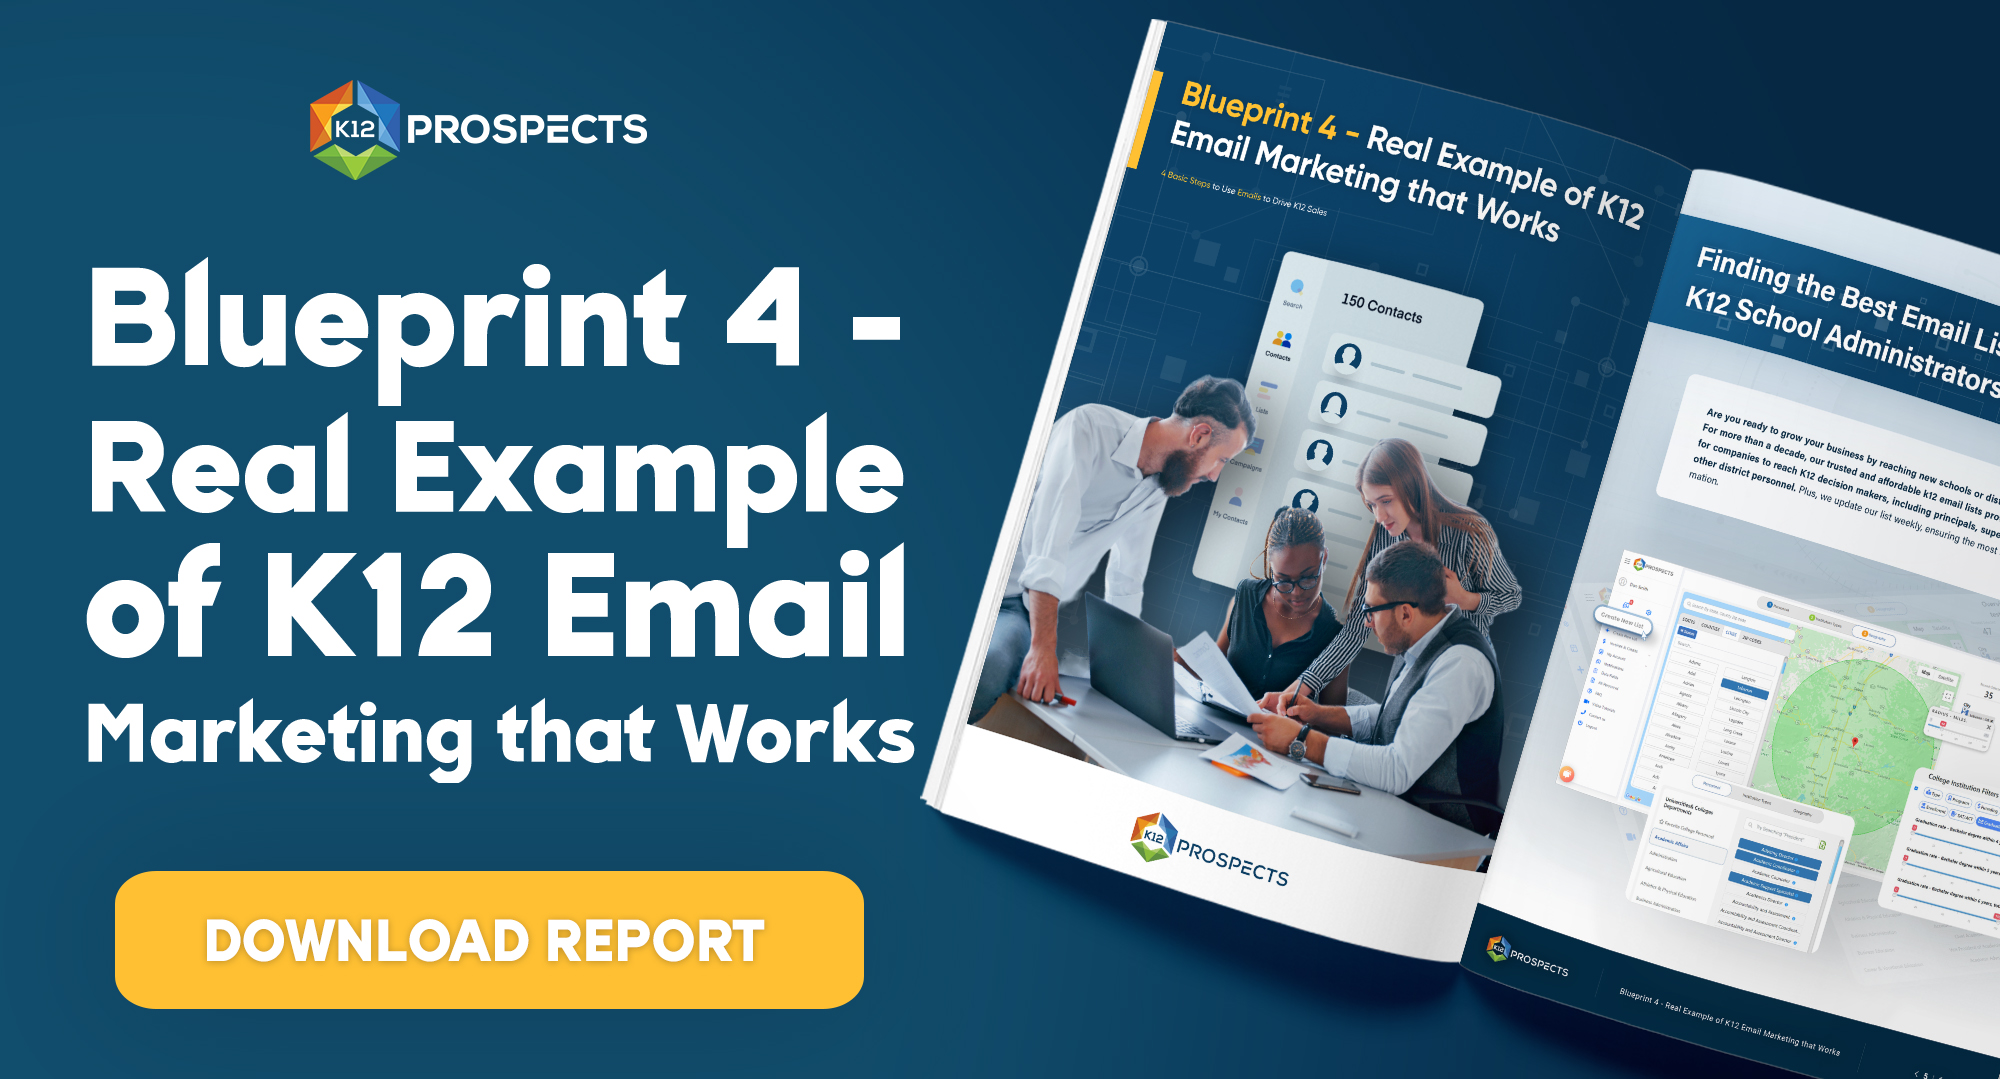 CTA Blueprint 4 Real Example of K12 Email Marketing that Works